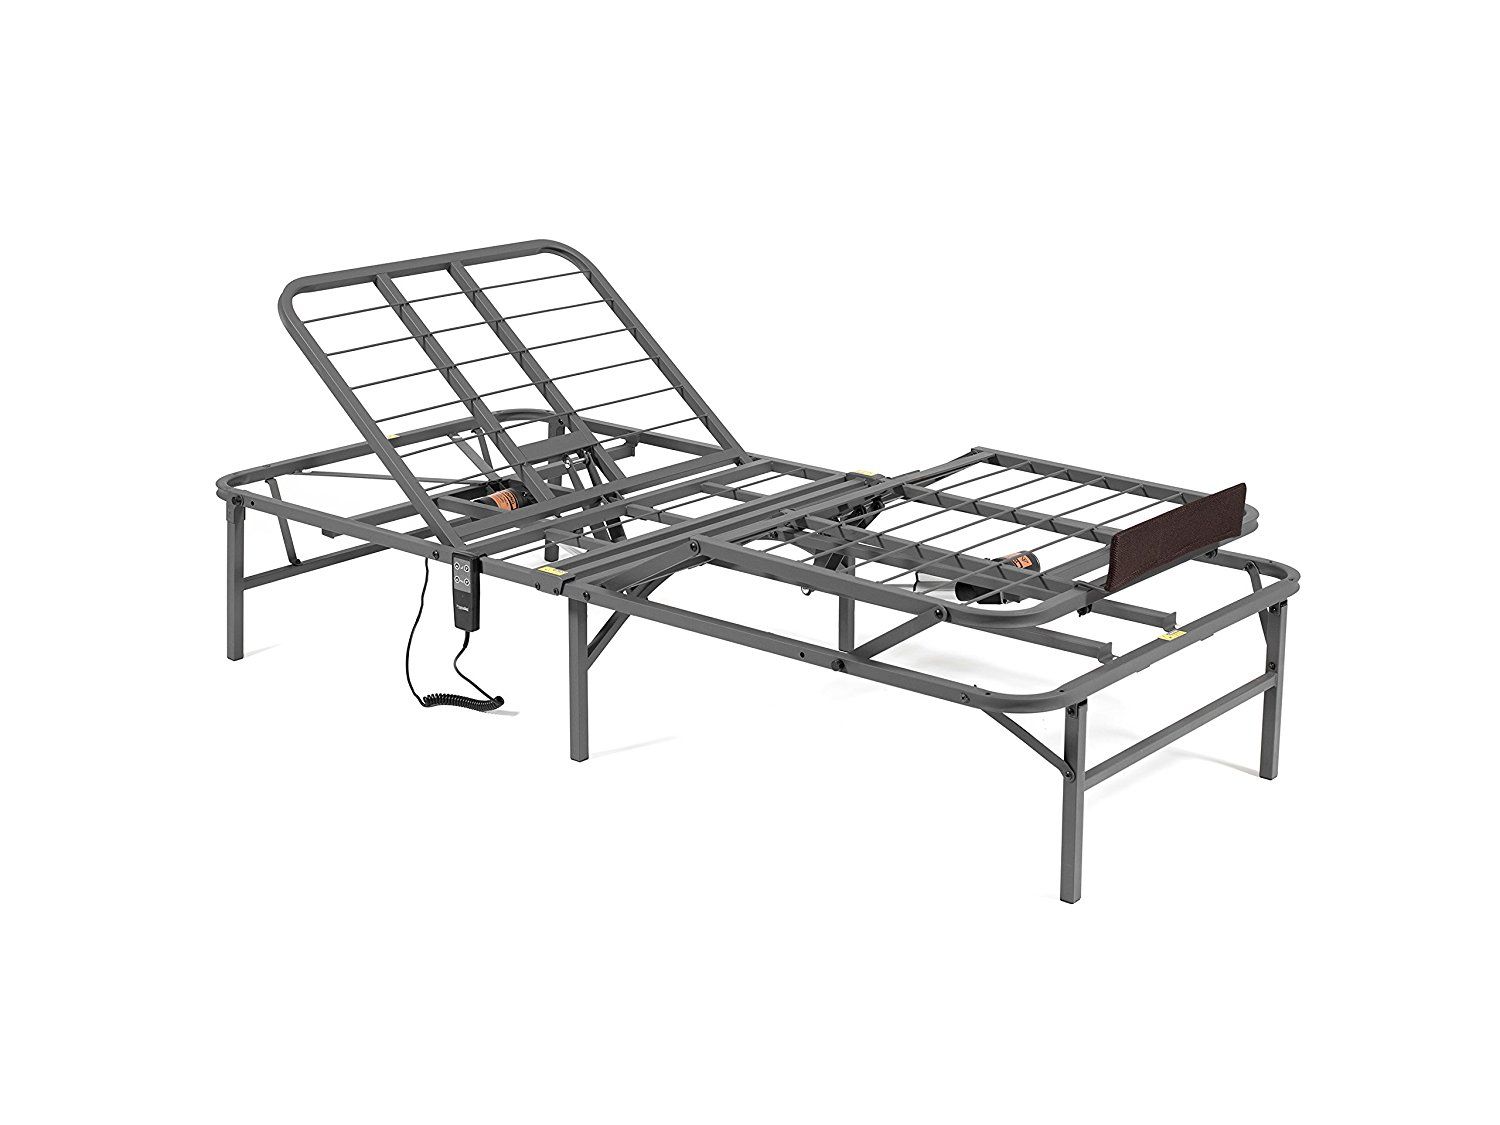 Contouring platform frame queen bed for space issues